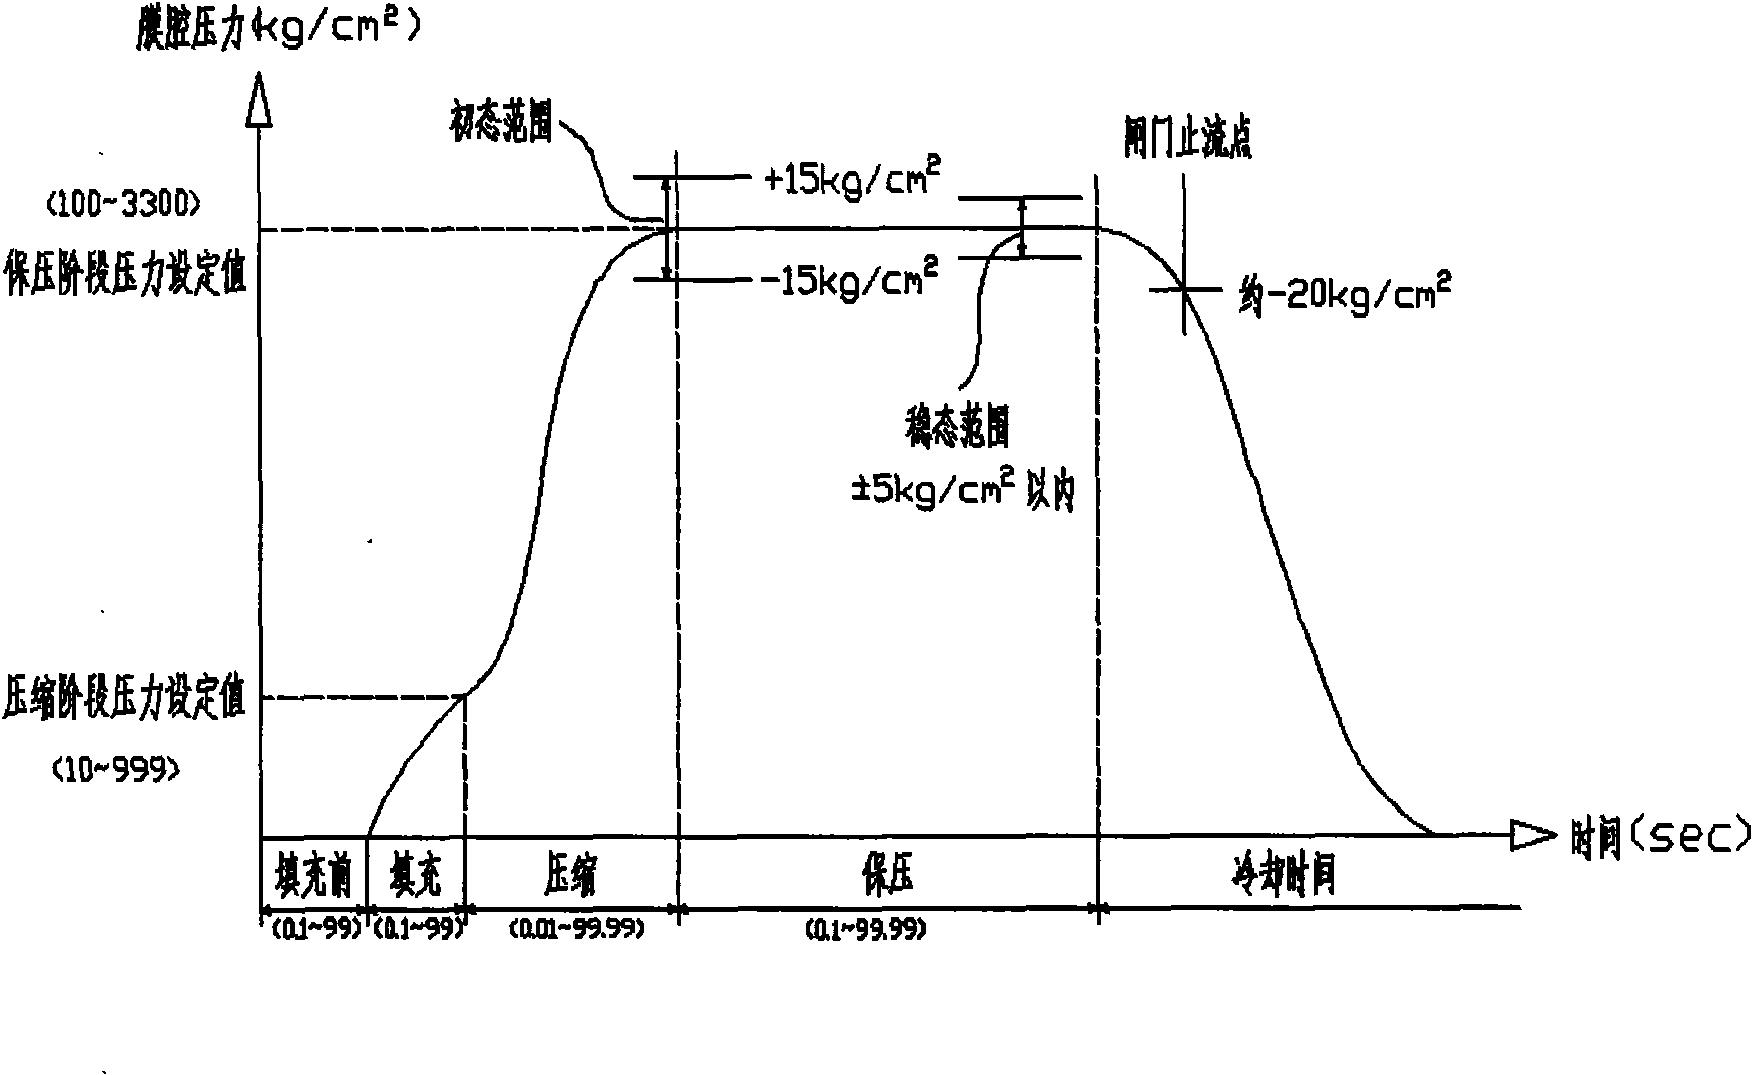 Method for controlling mold cavity resin pressure of injection molding machine